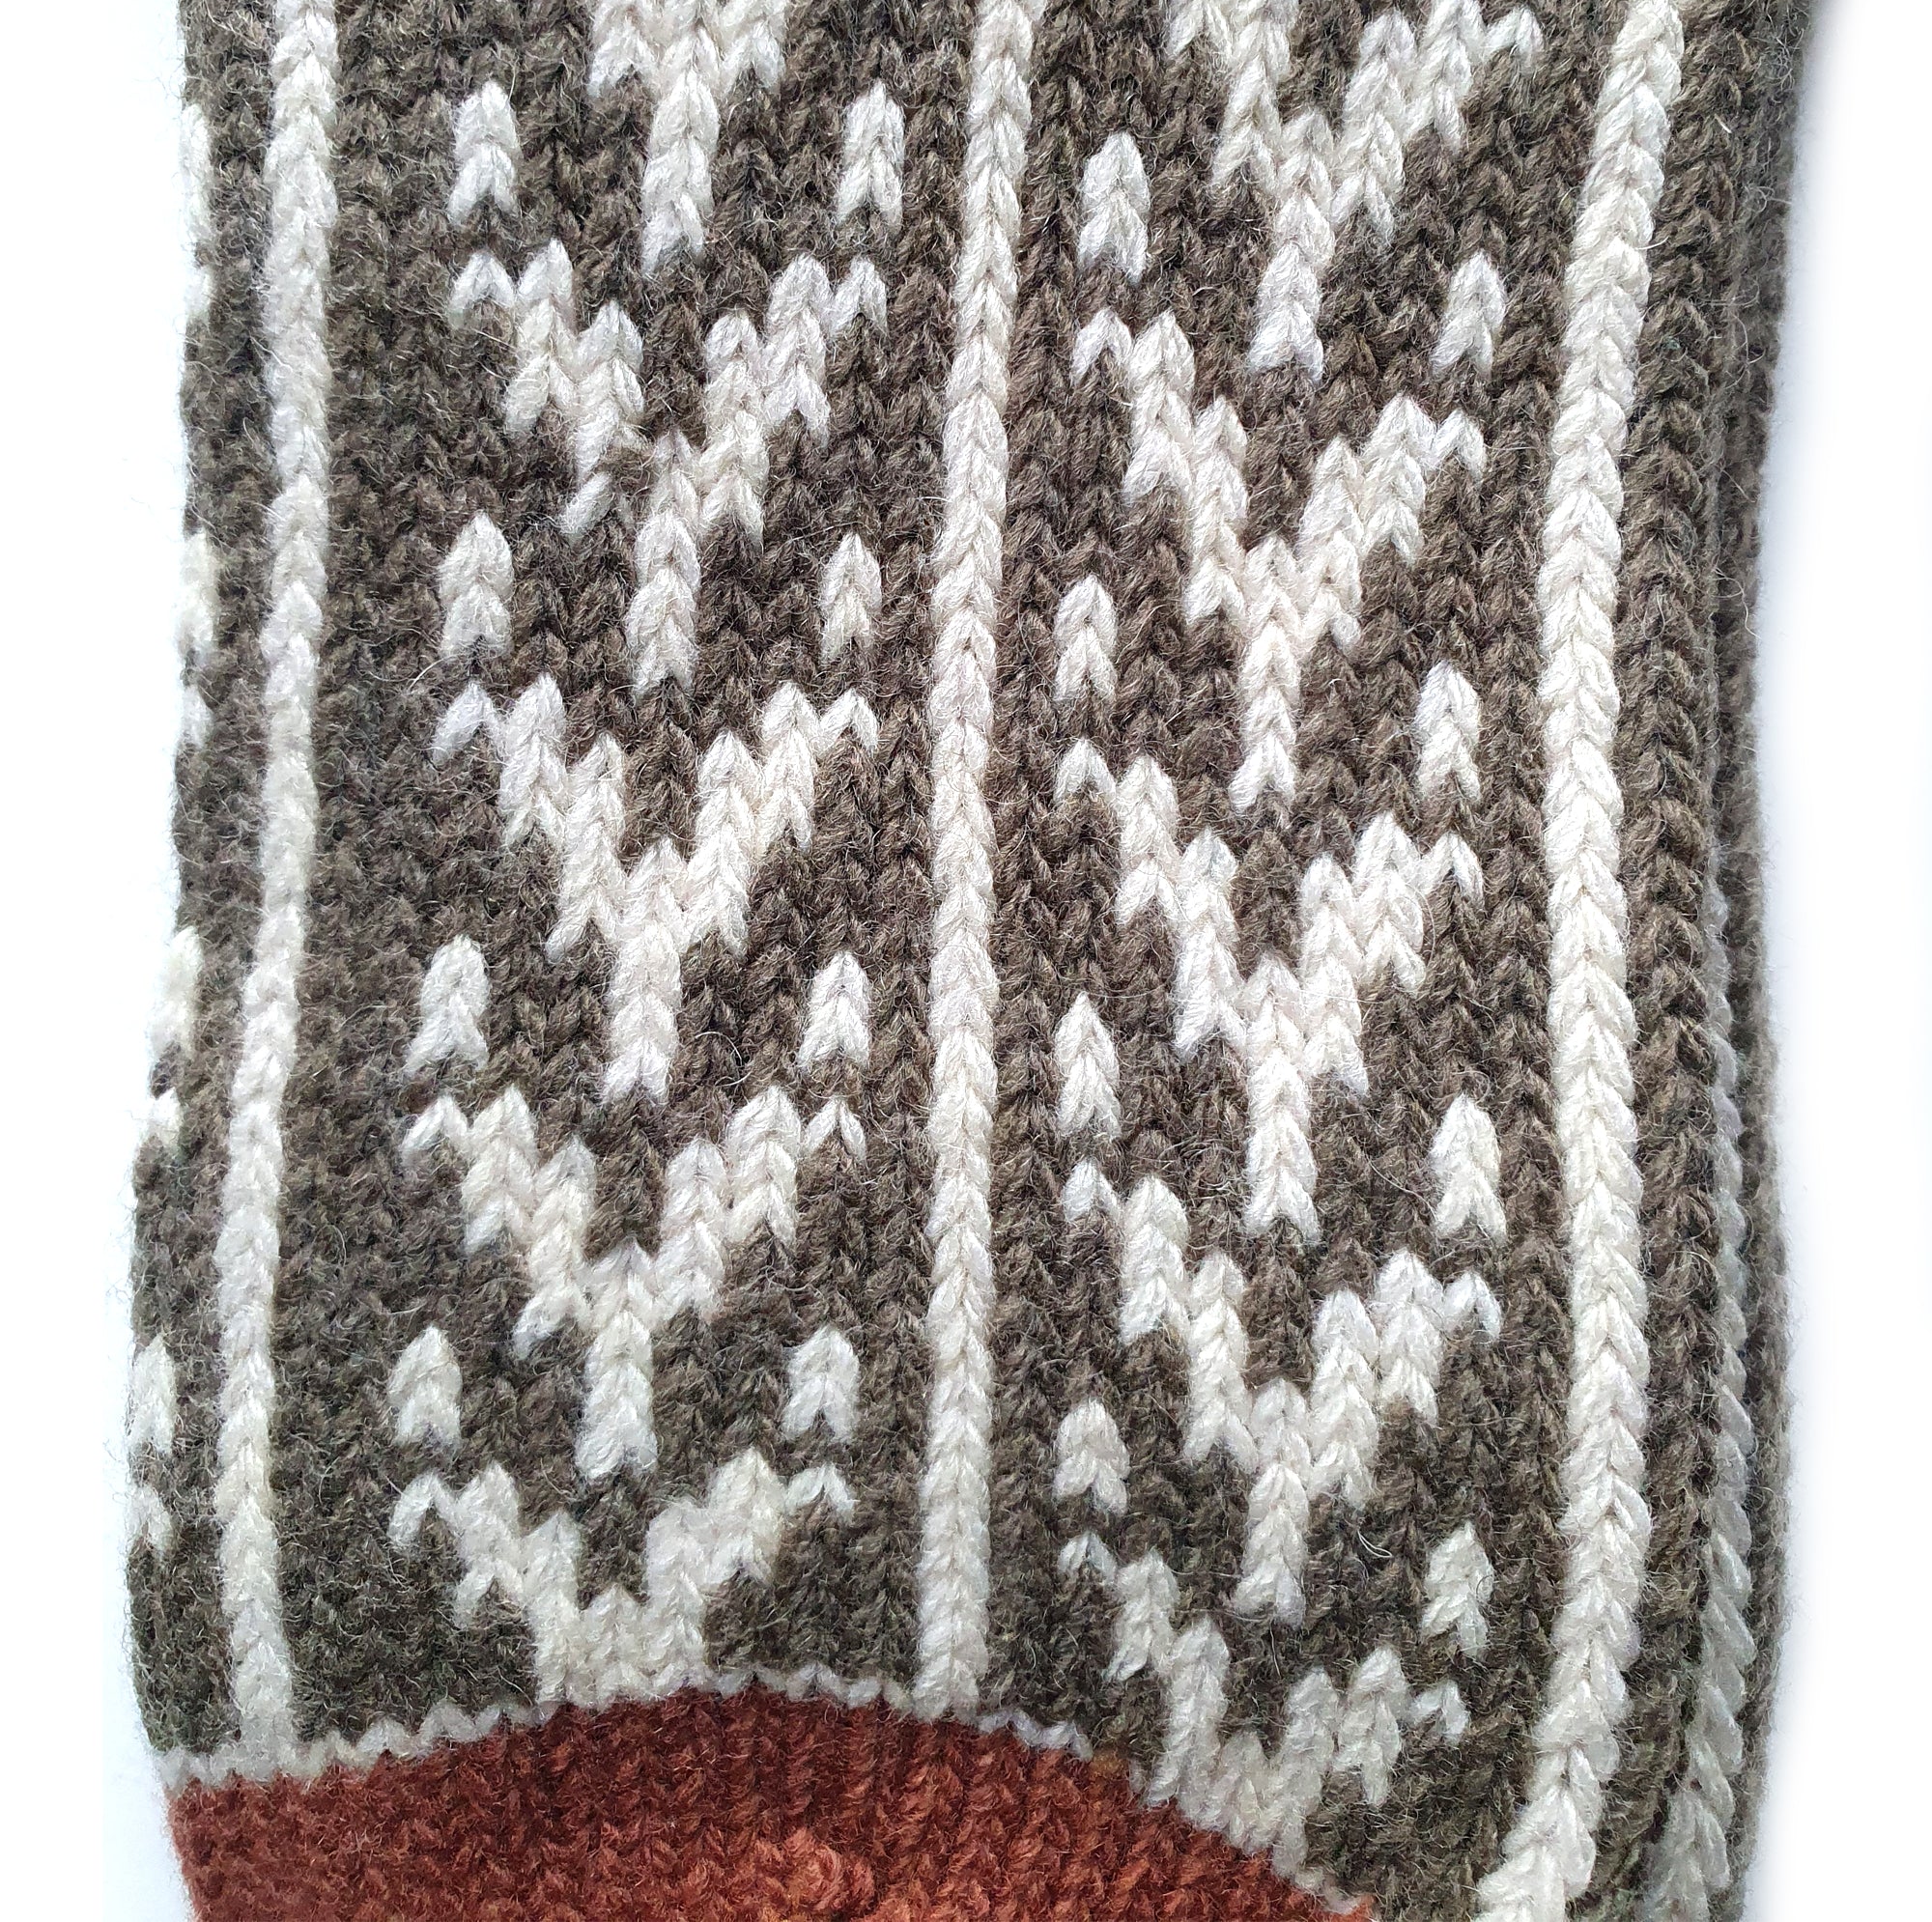 Patterned wool socks with green/brown/blue decor